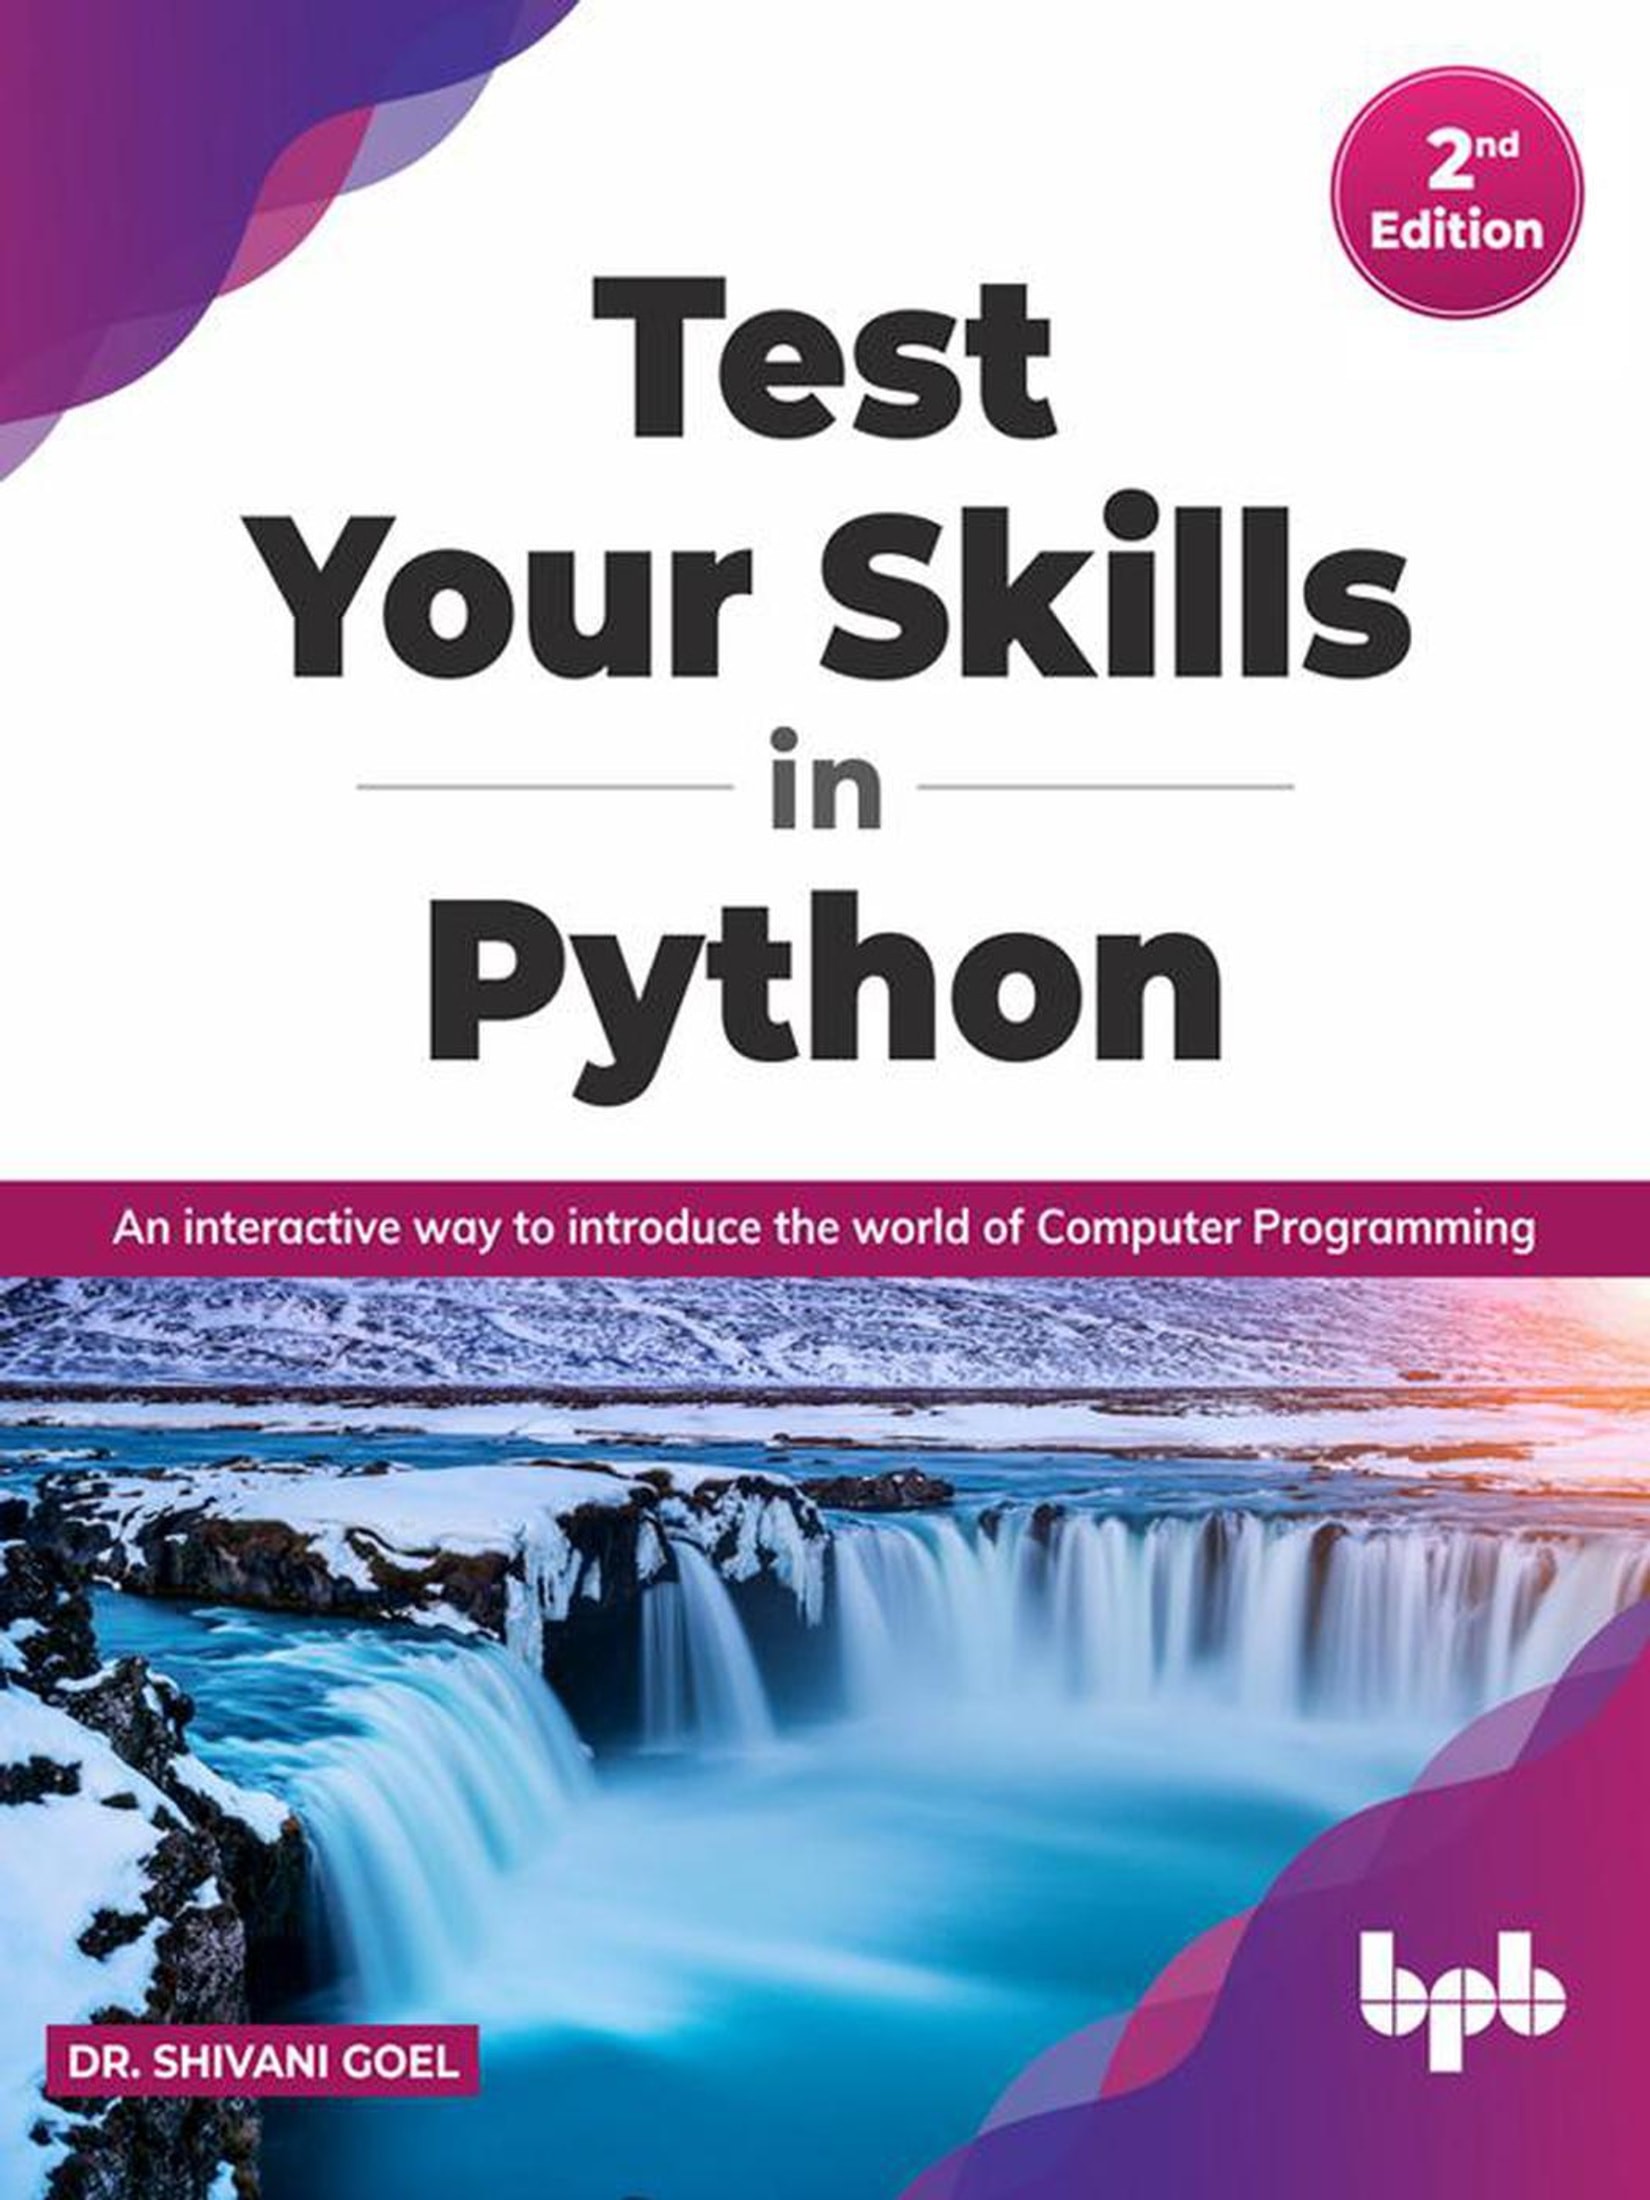 Test Your Skills in Python - Second Edition: An Interactive Way to Introduce the World of Computer Programming (English Edition)